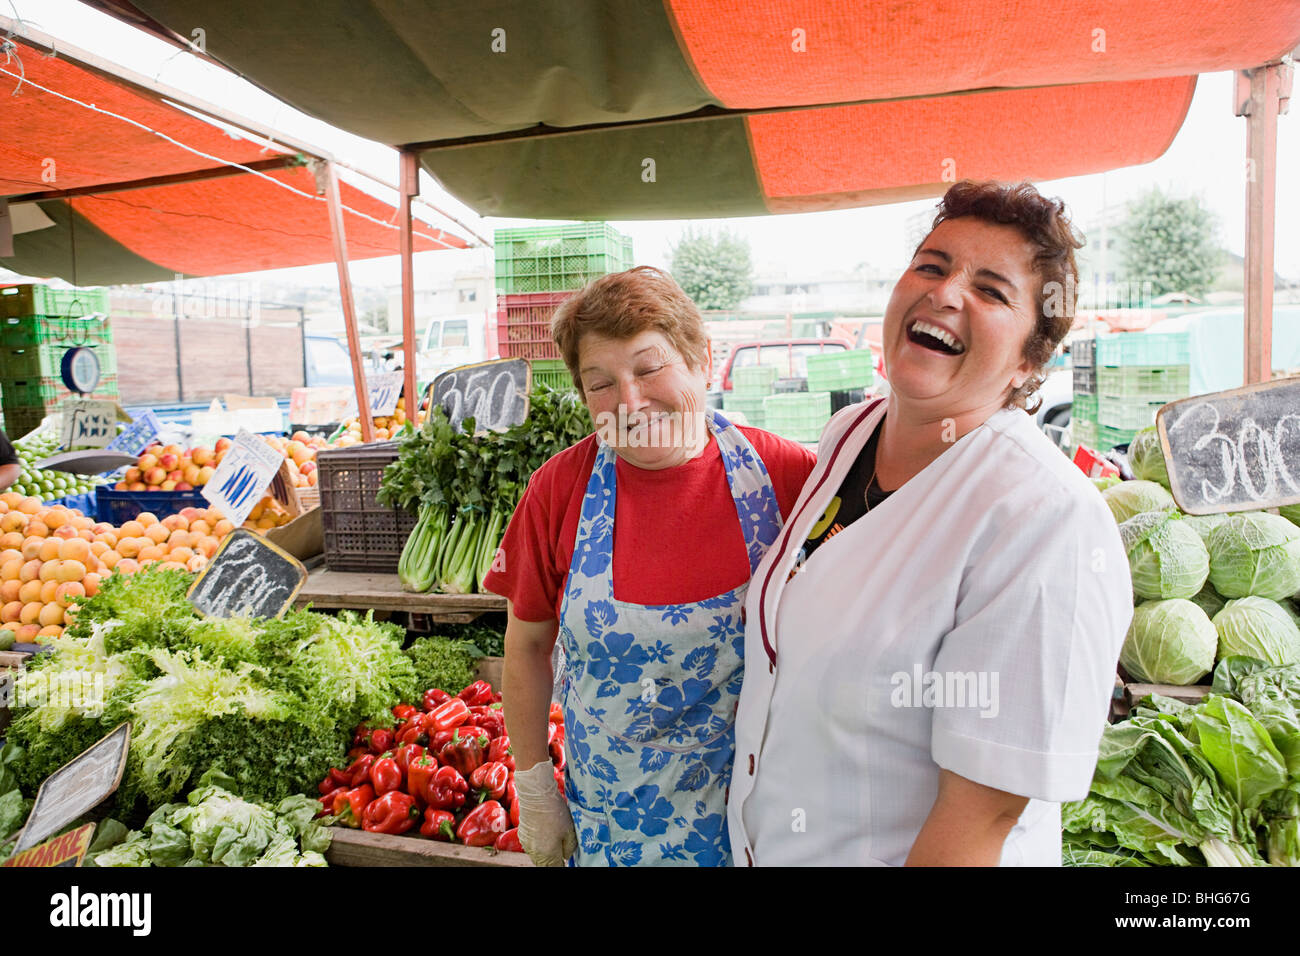 Two female traders on vegetable stall Stock Photo